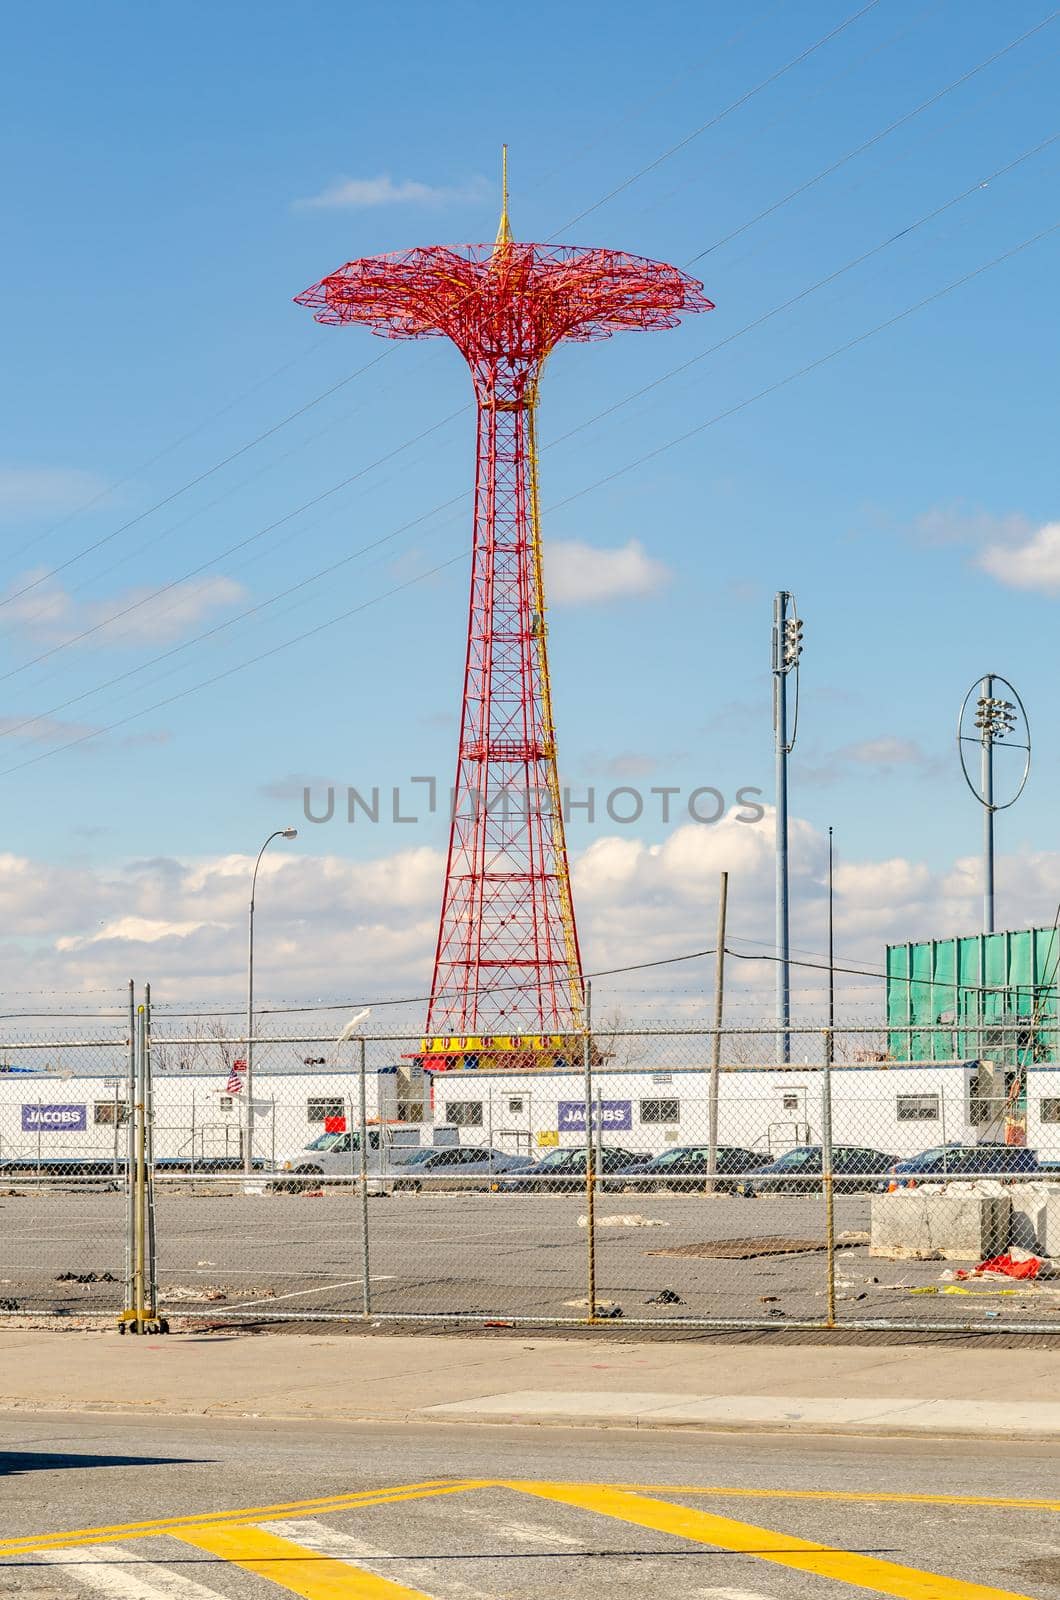 Parachute Jump at Luna Park, Coney Island during winter day, view from the distance, NYC by bildgigant